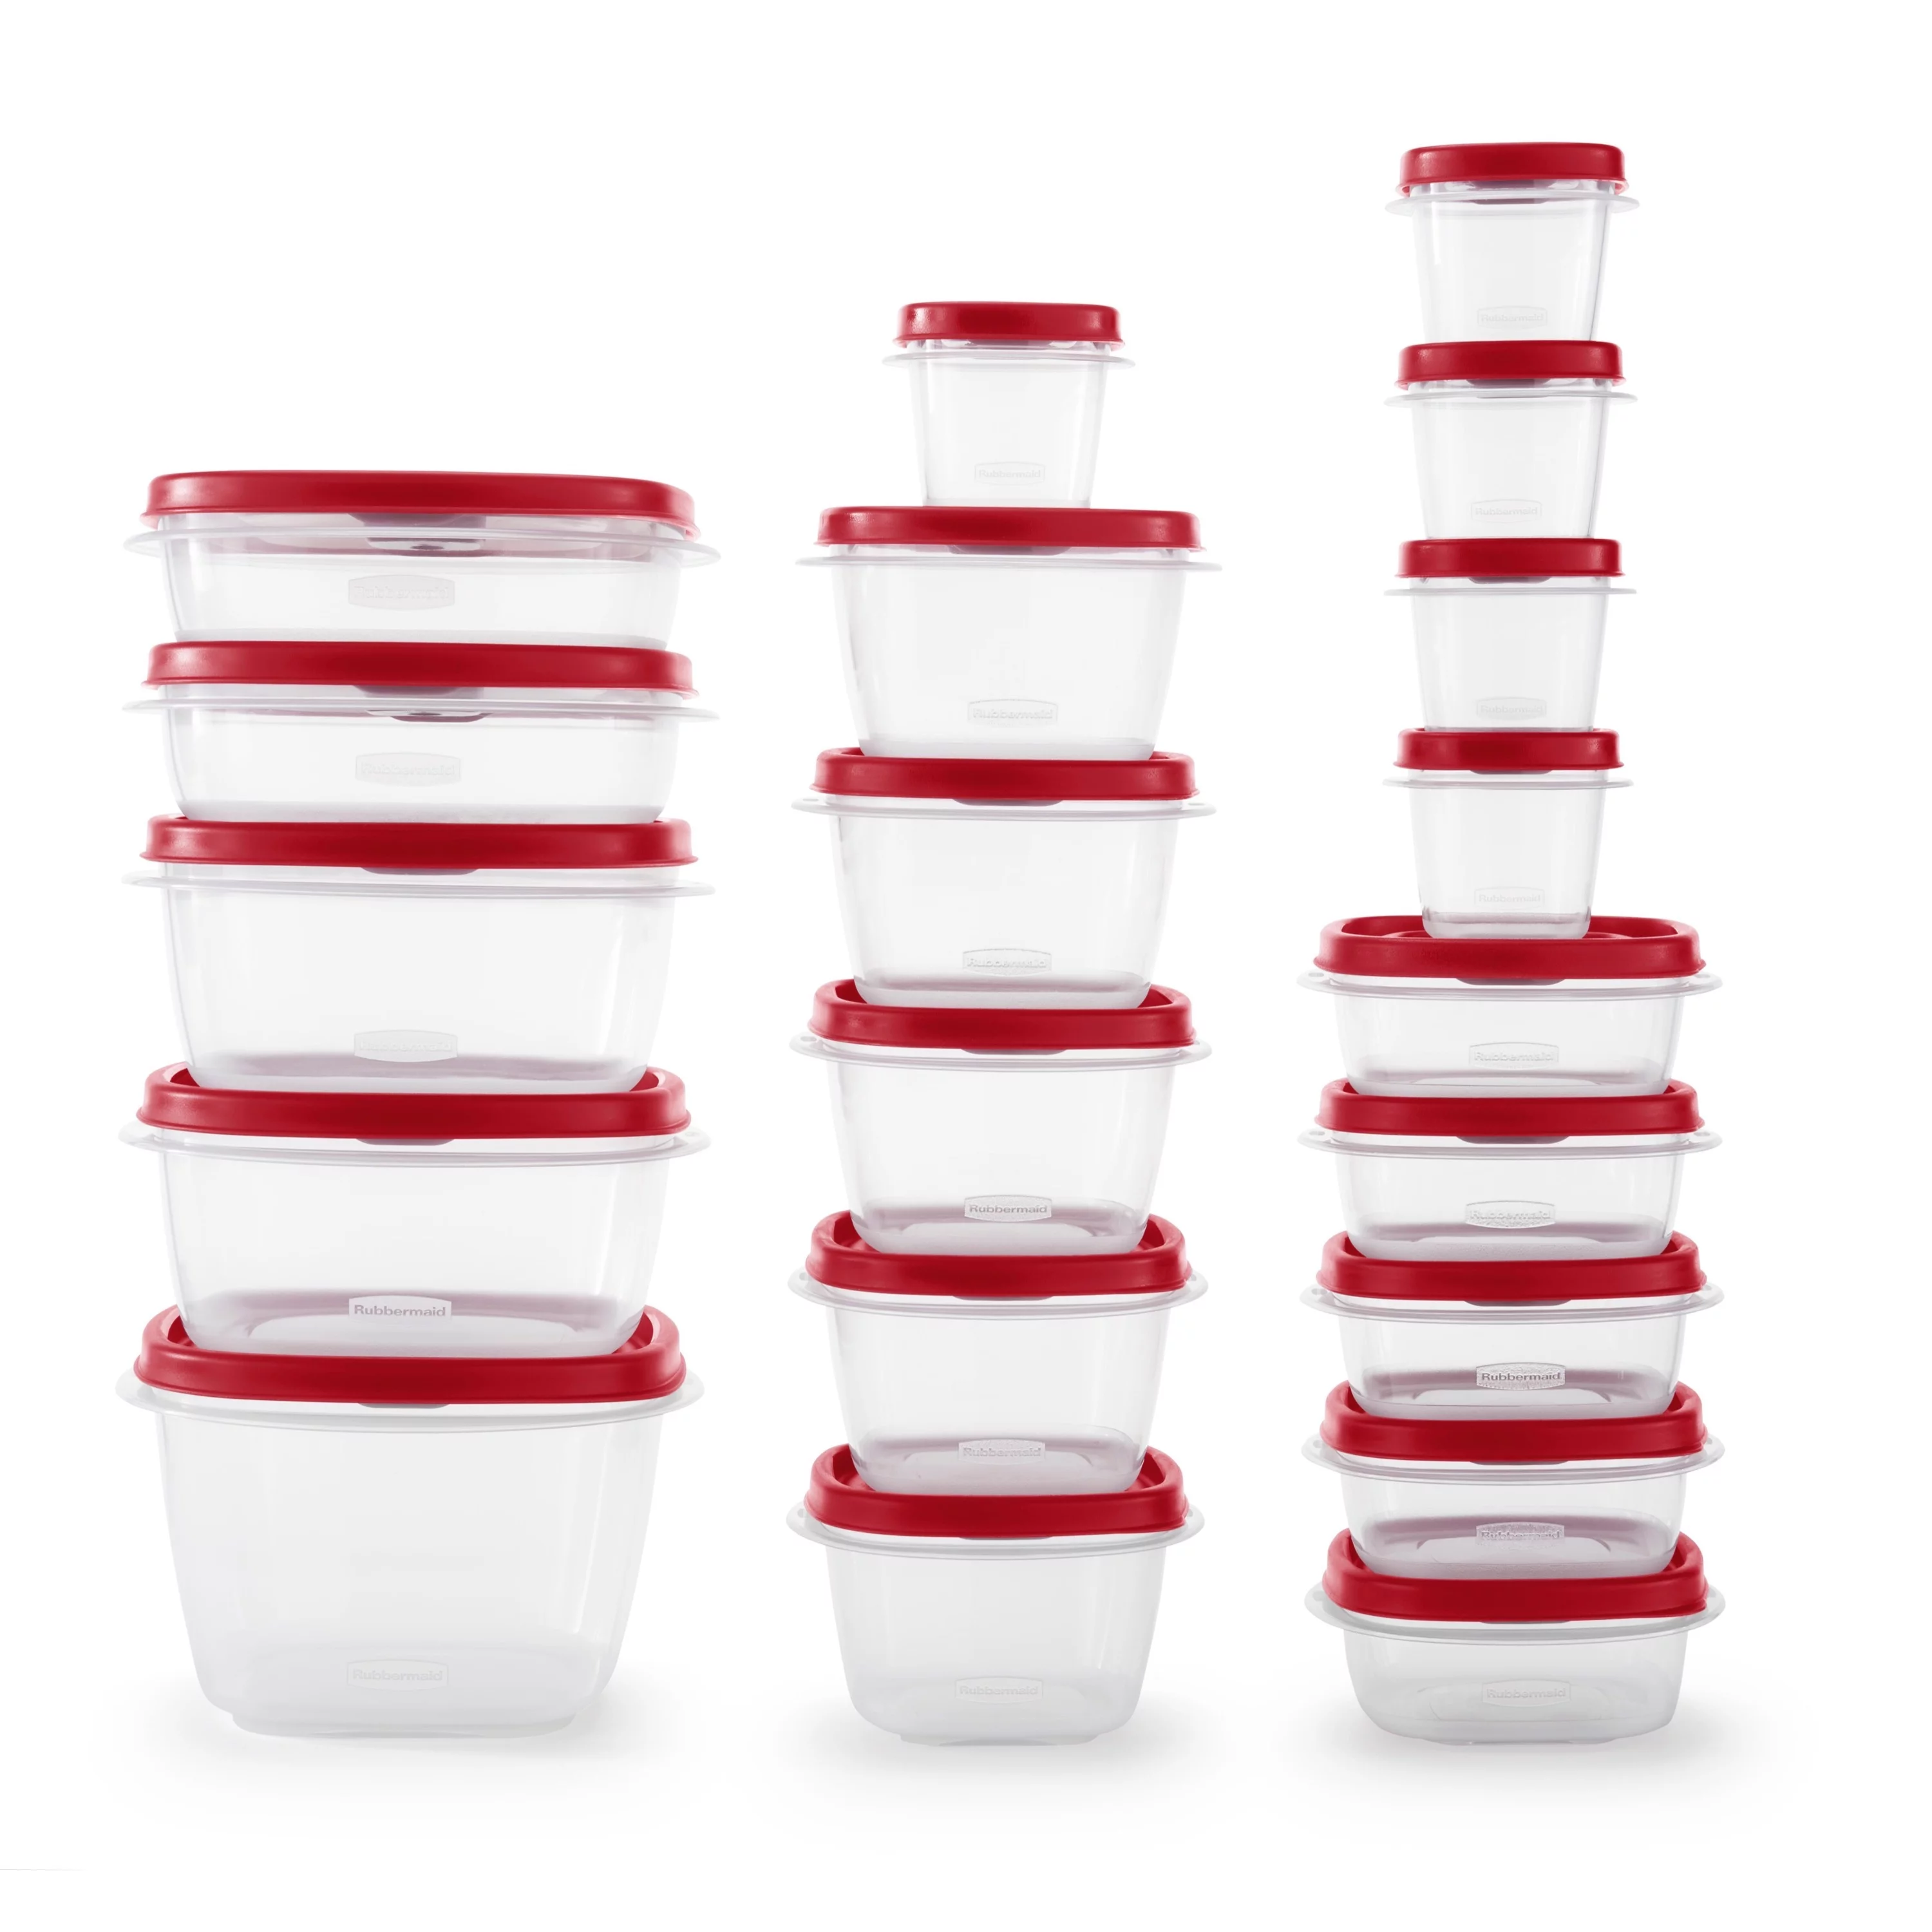 Rubbermaid EasyFindLids 40 Piece Food Storage Containers with Vented Lids Variety Set, Red